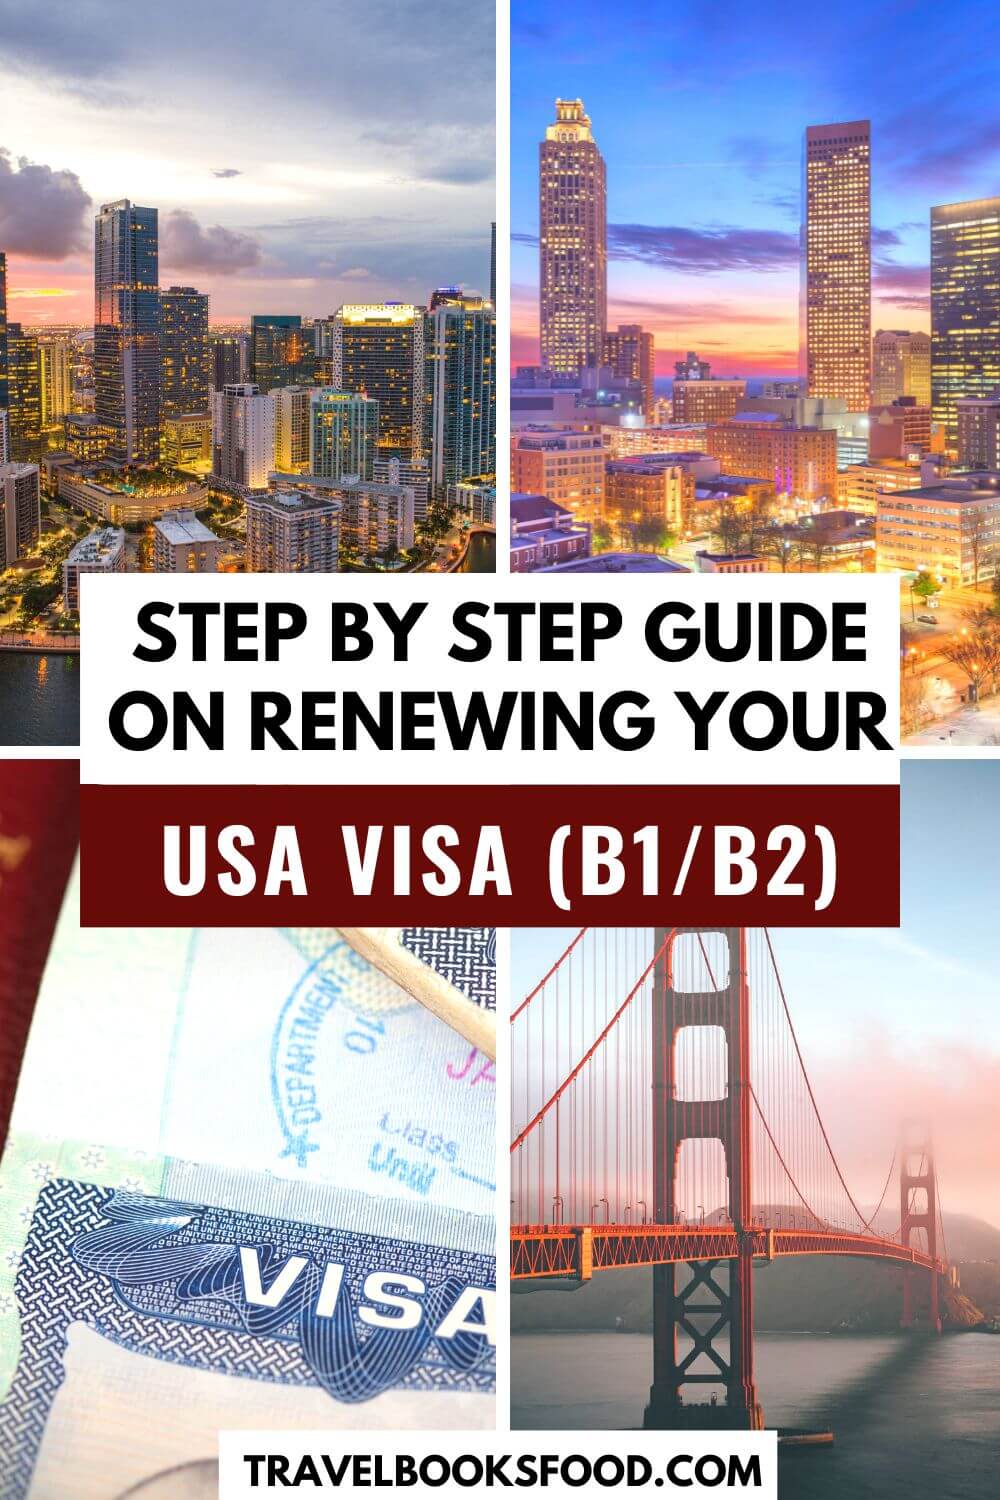 Step By Step Guide On Renewal Process For Tourist Visa For USA From India B1B2 2